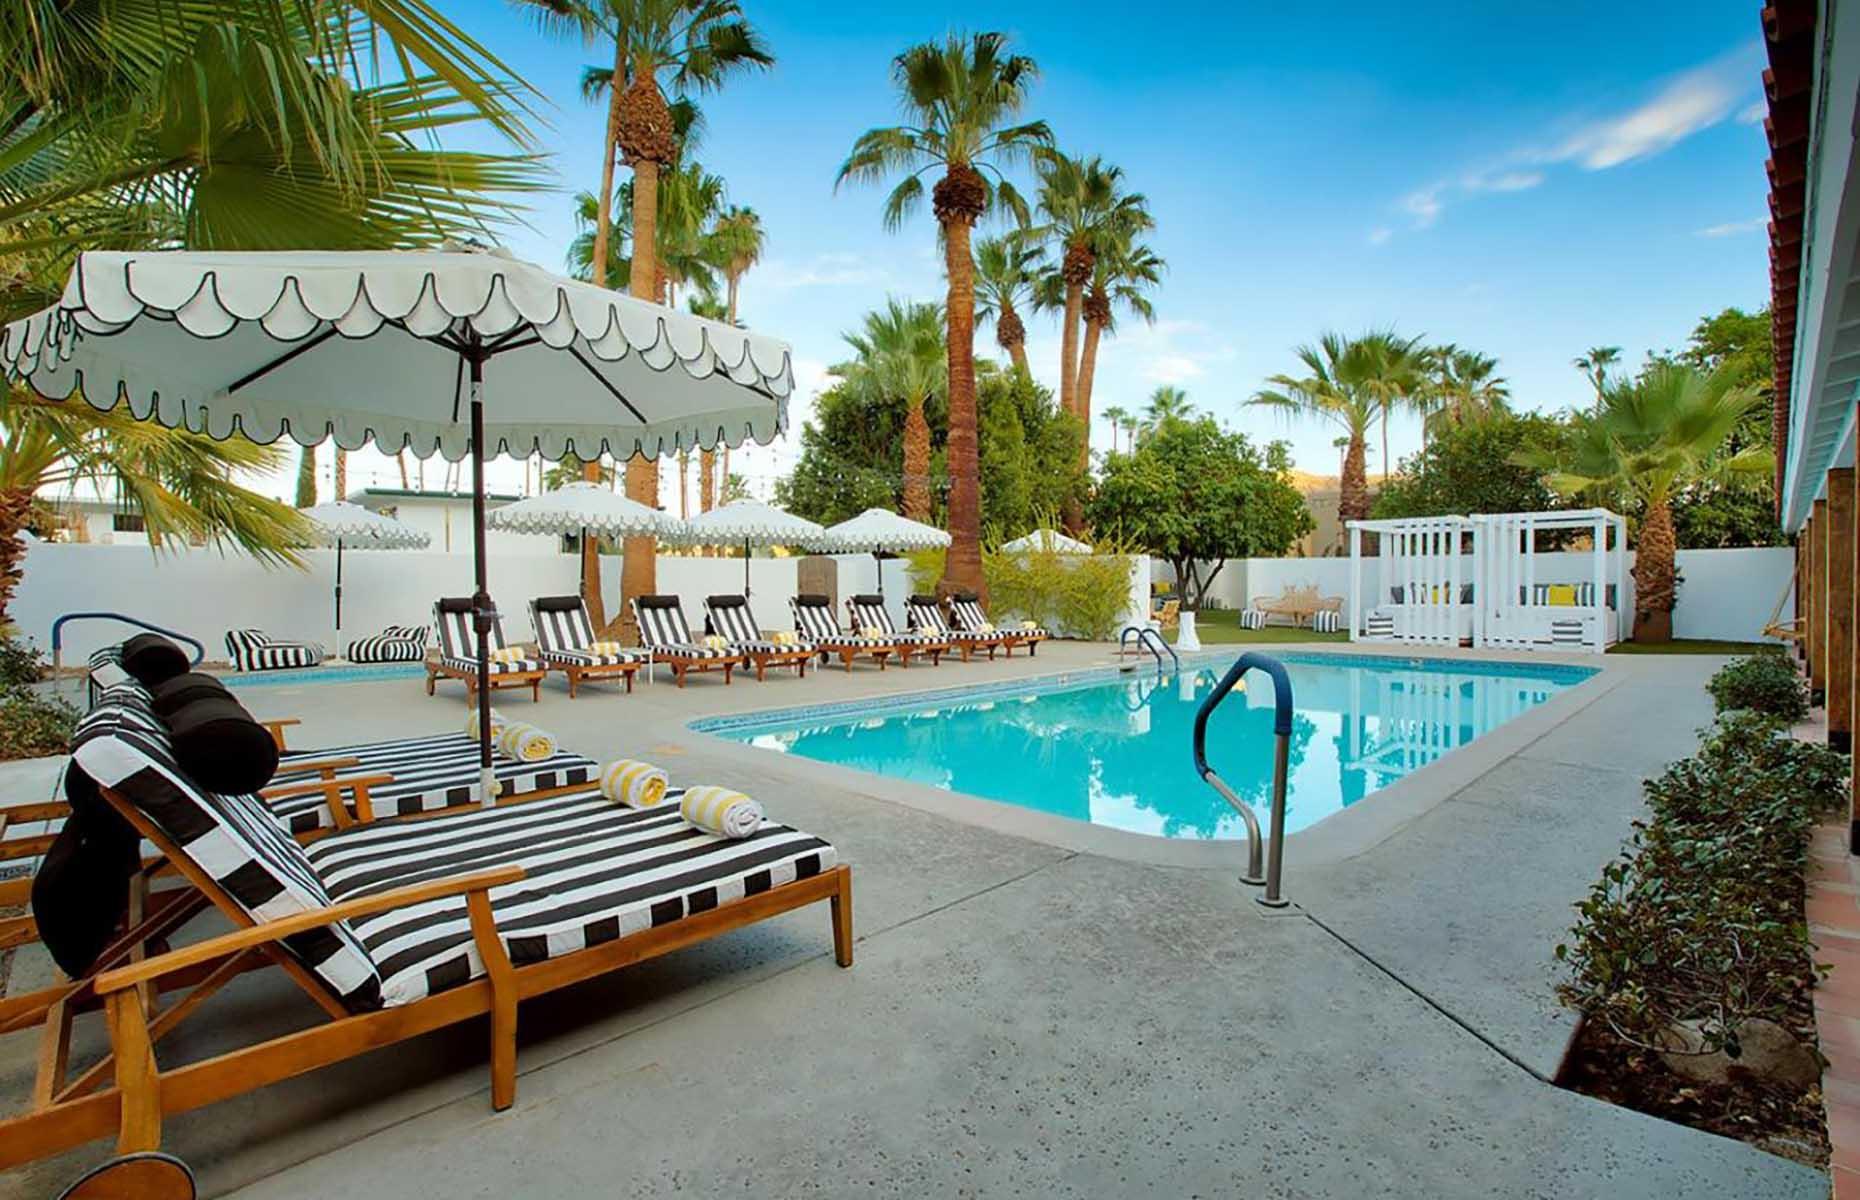 <p>You'll feel as though you've been whisked off to St Tropez at this swish Palm Springs hotel. It's inspired by the French Riviera in the 1960s and the whole place oozes retro glamor, with its striped loungers, airy coastal-themed rooms and serene gardens dotted with bistro tables. Hang out poolside, drinking in views of palms and the San Jacinto Mountains, before striking out to explore the desert city of Palm Springs.</p>